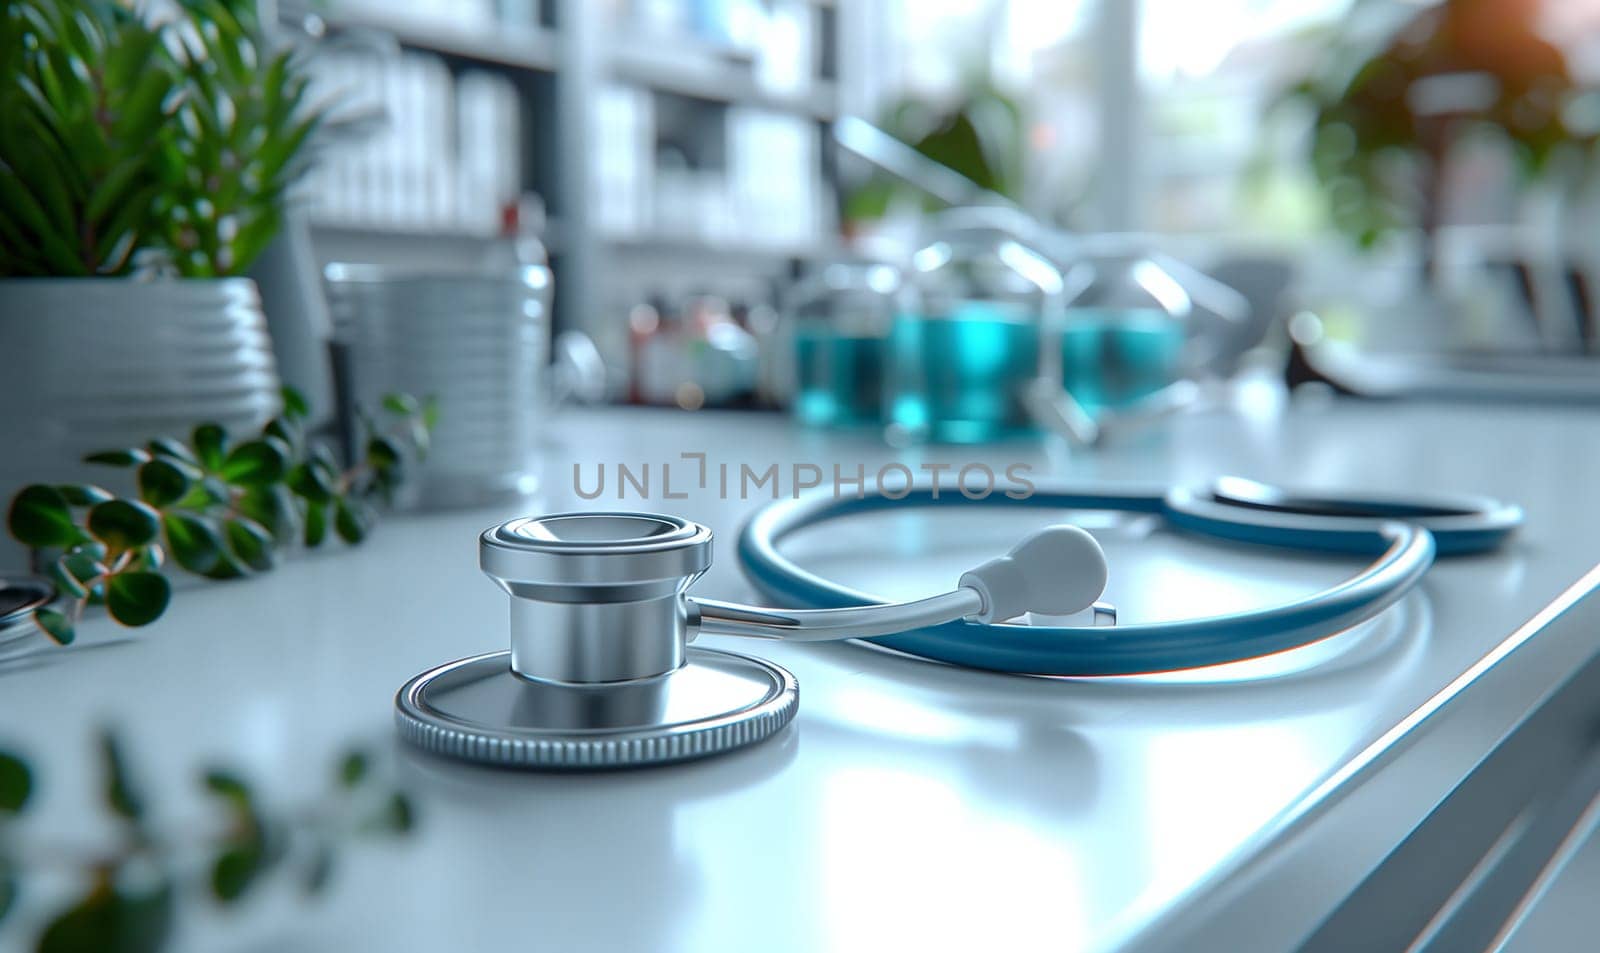 A stethoscope is placed on a pristine white counter in a building, surrounded by glassware and tableware. The elegant display enhances the propertys ambiance